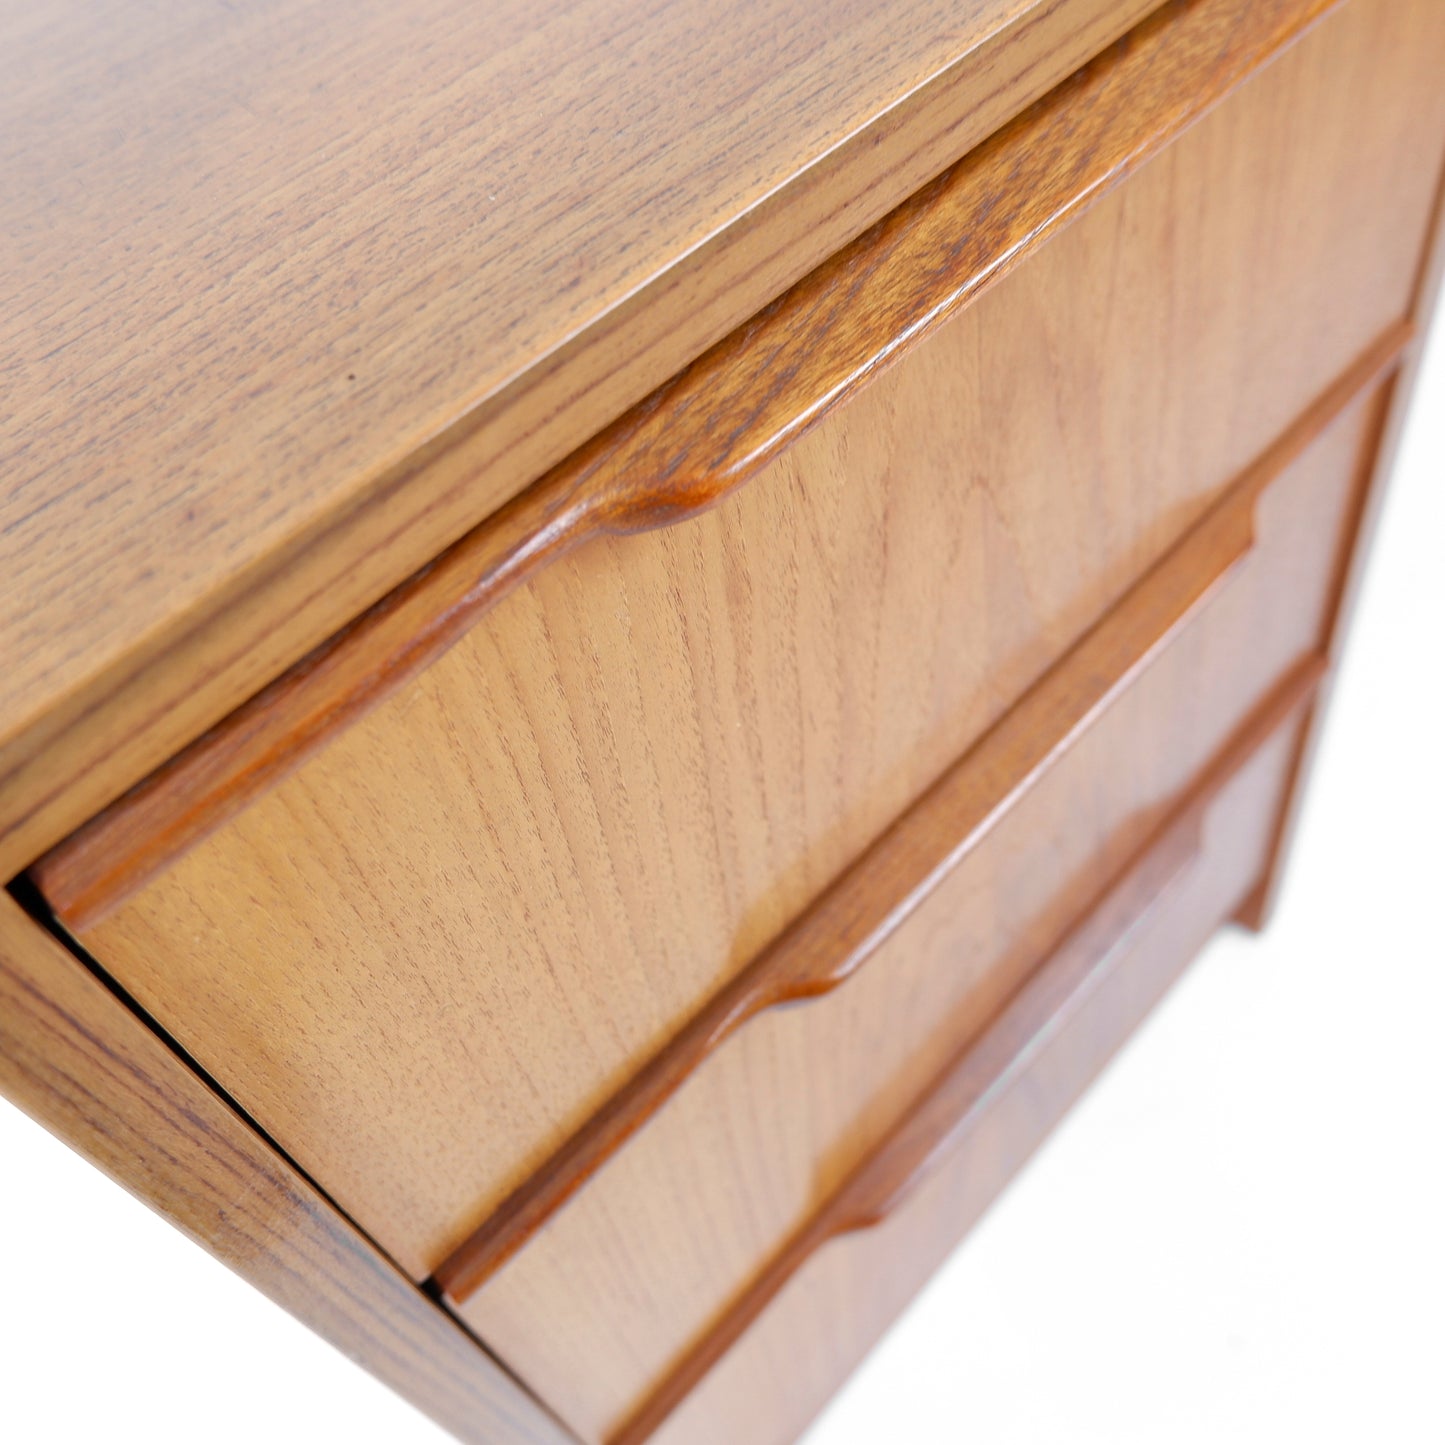 Danish Bedside Table by Steen's, Denmark - Drawers